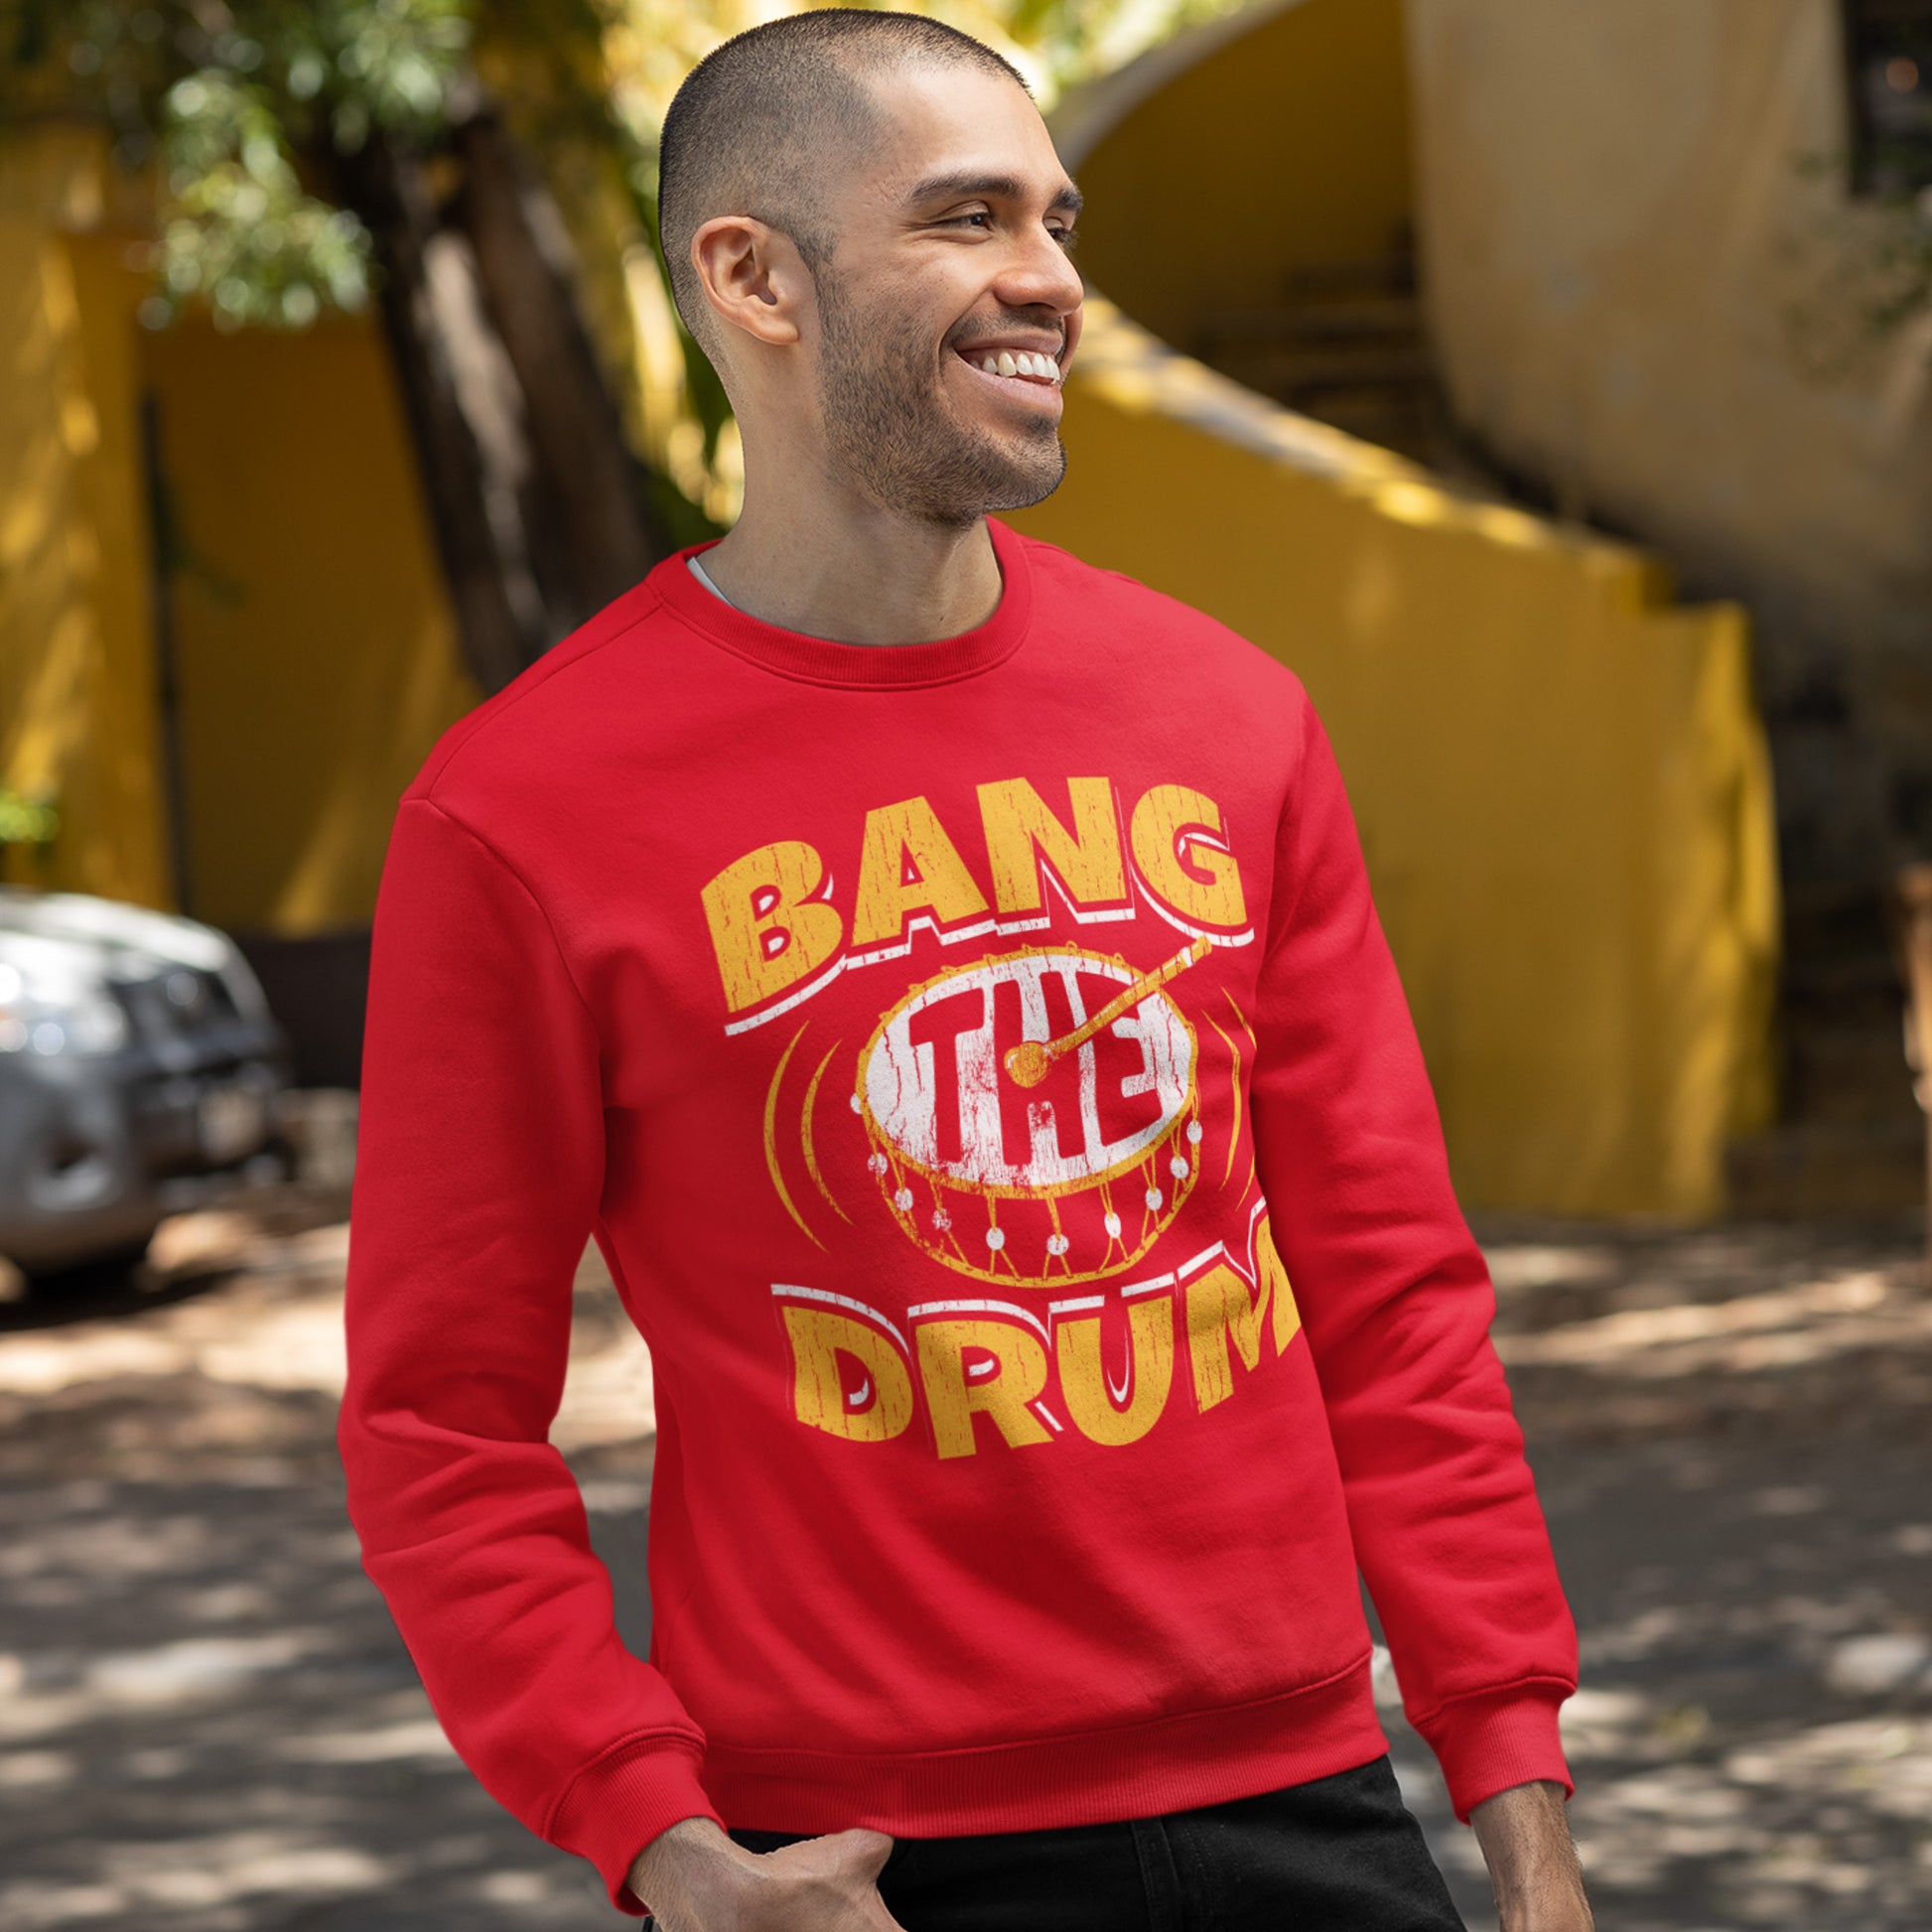 KC Swag Kansas City Chiefs Distressed White & Gold Band The Drum on a Red Crewneck Sweatshirt worn by a male model in a parking lot in front of a yellow concrete staircase